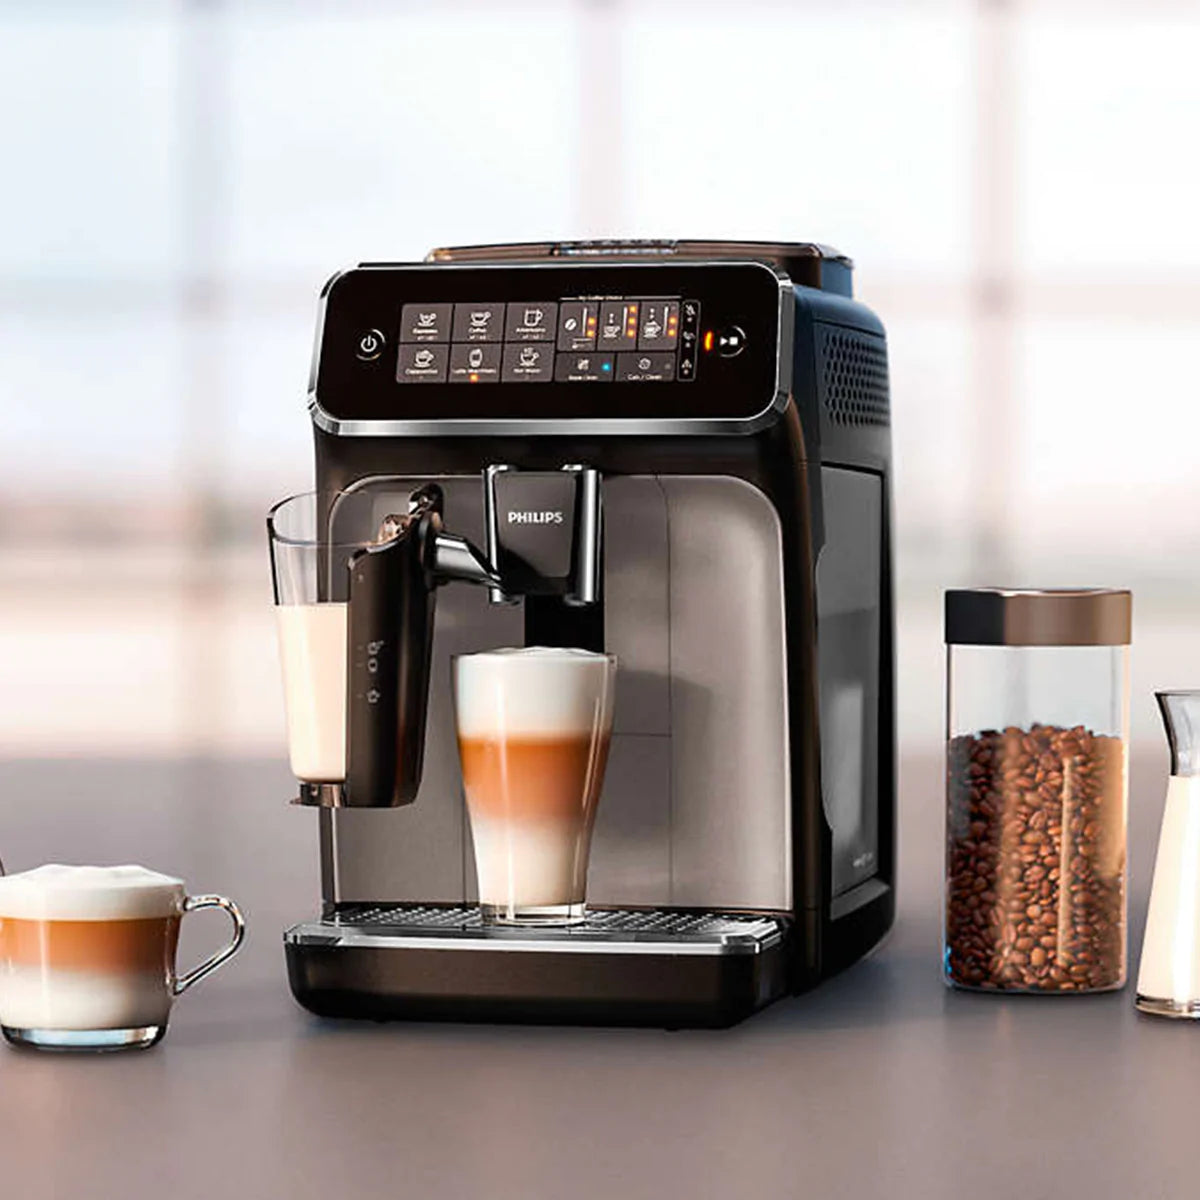  PHILIPS 4300 Series Fully Automatic Espresso Machine - LatteGo  Milk Frother, 8 Coffee Varieties, Intuitive Touch Display, Black,  (EP4347/94): Home & Kitchen